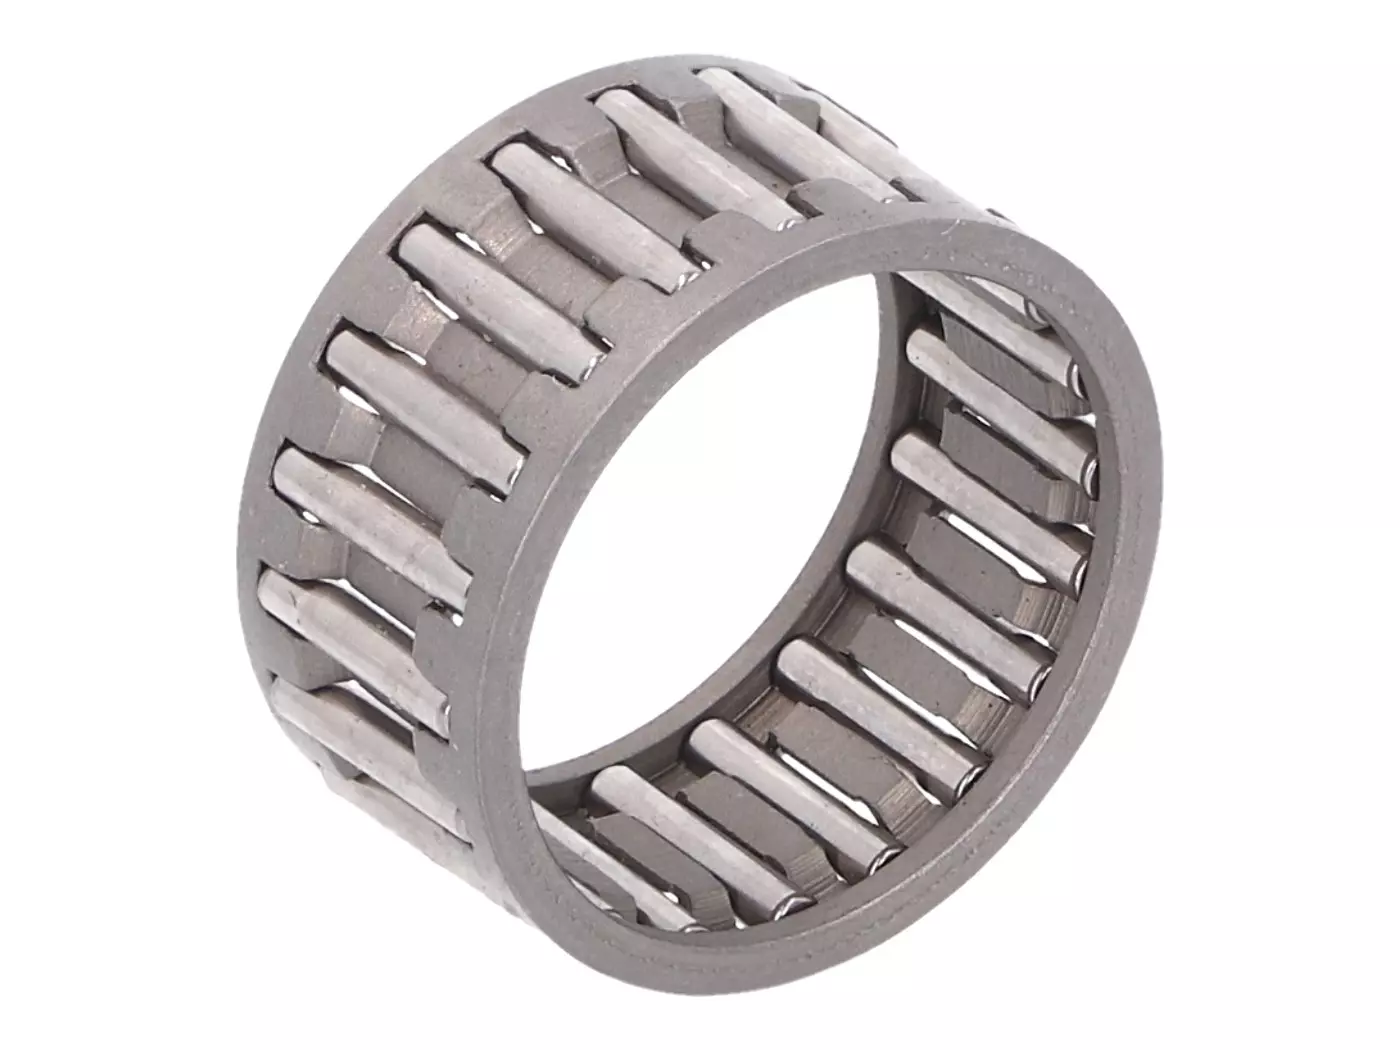 Clutch Basket Needle Bearing 22x26x13mm DIN 5405 For Piaggio / Derbi Engines D50B0, EBE, EBS